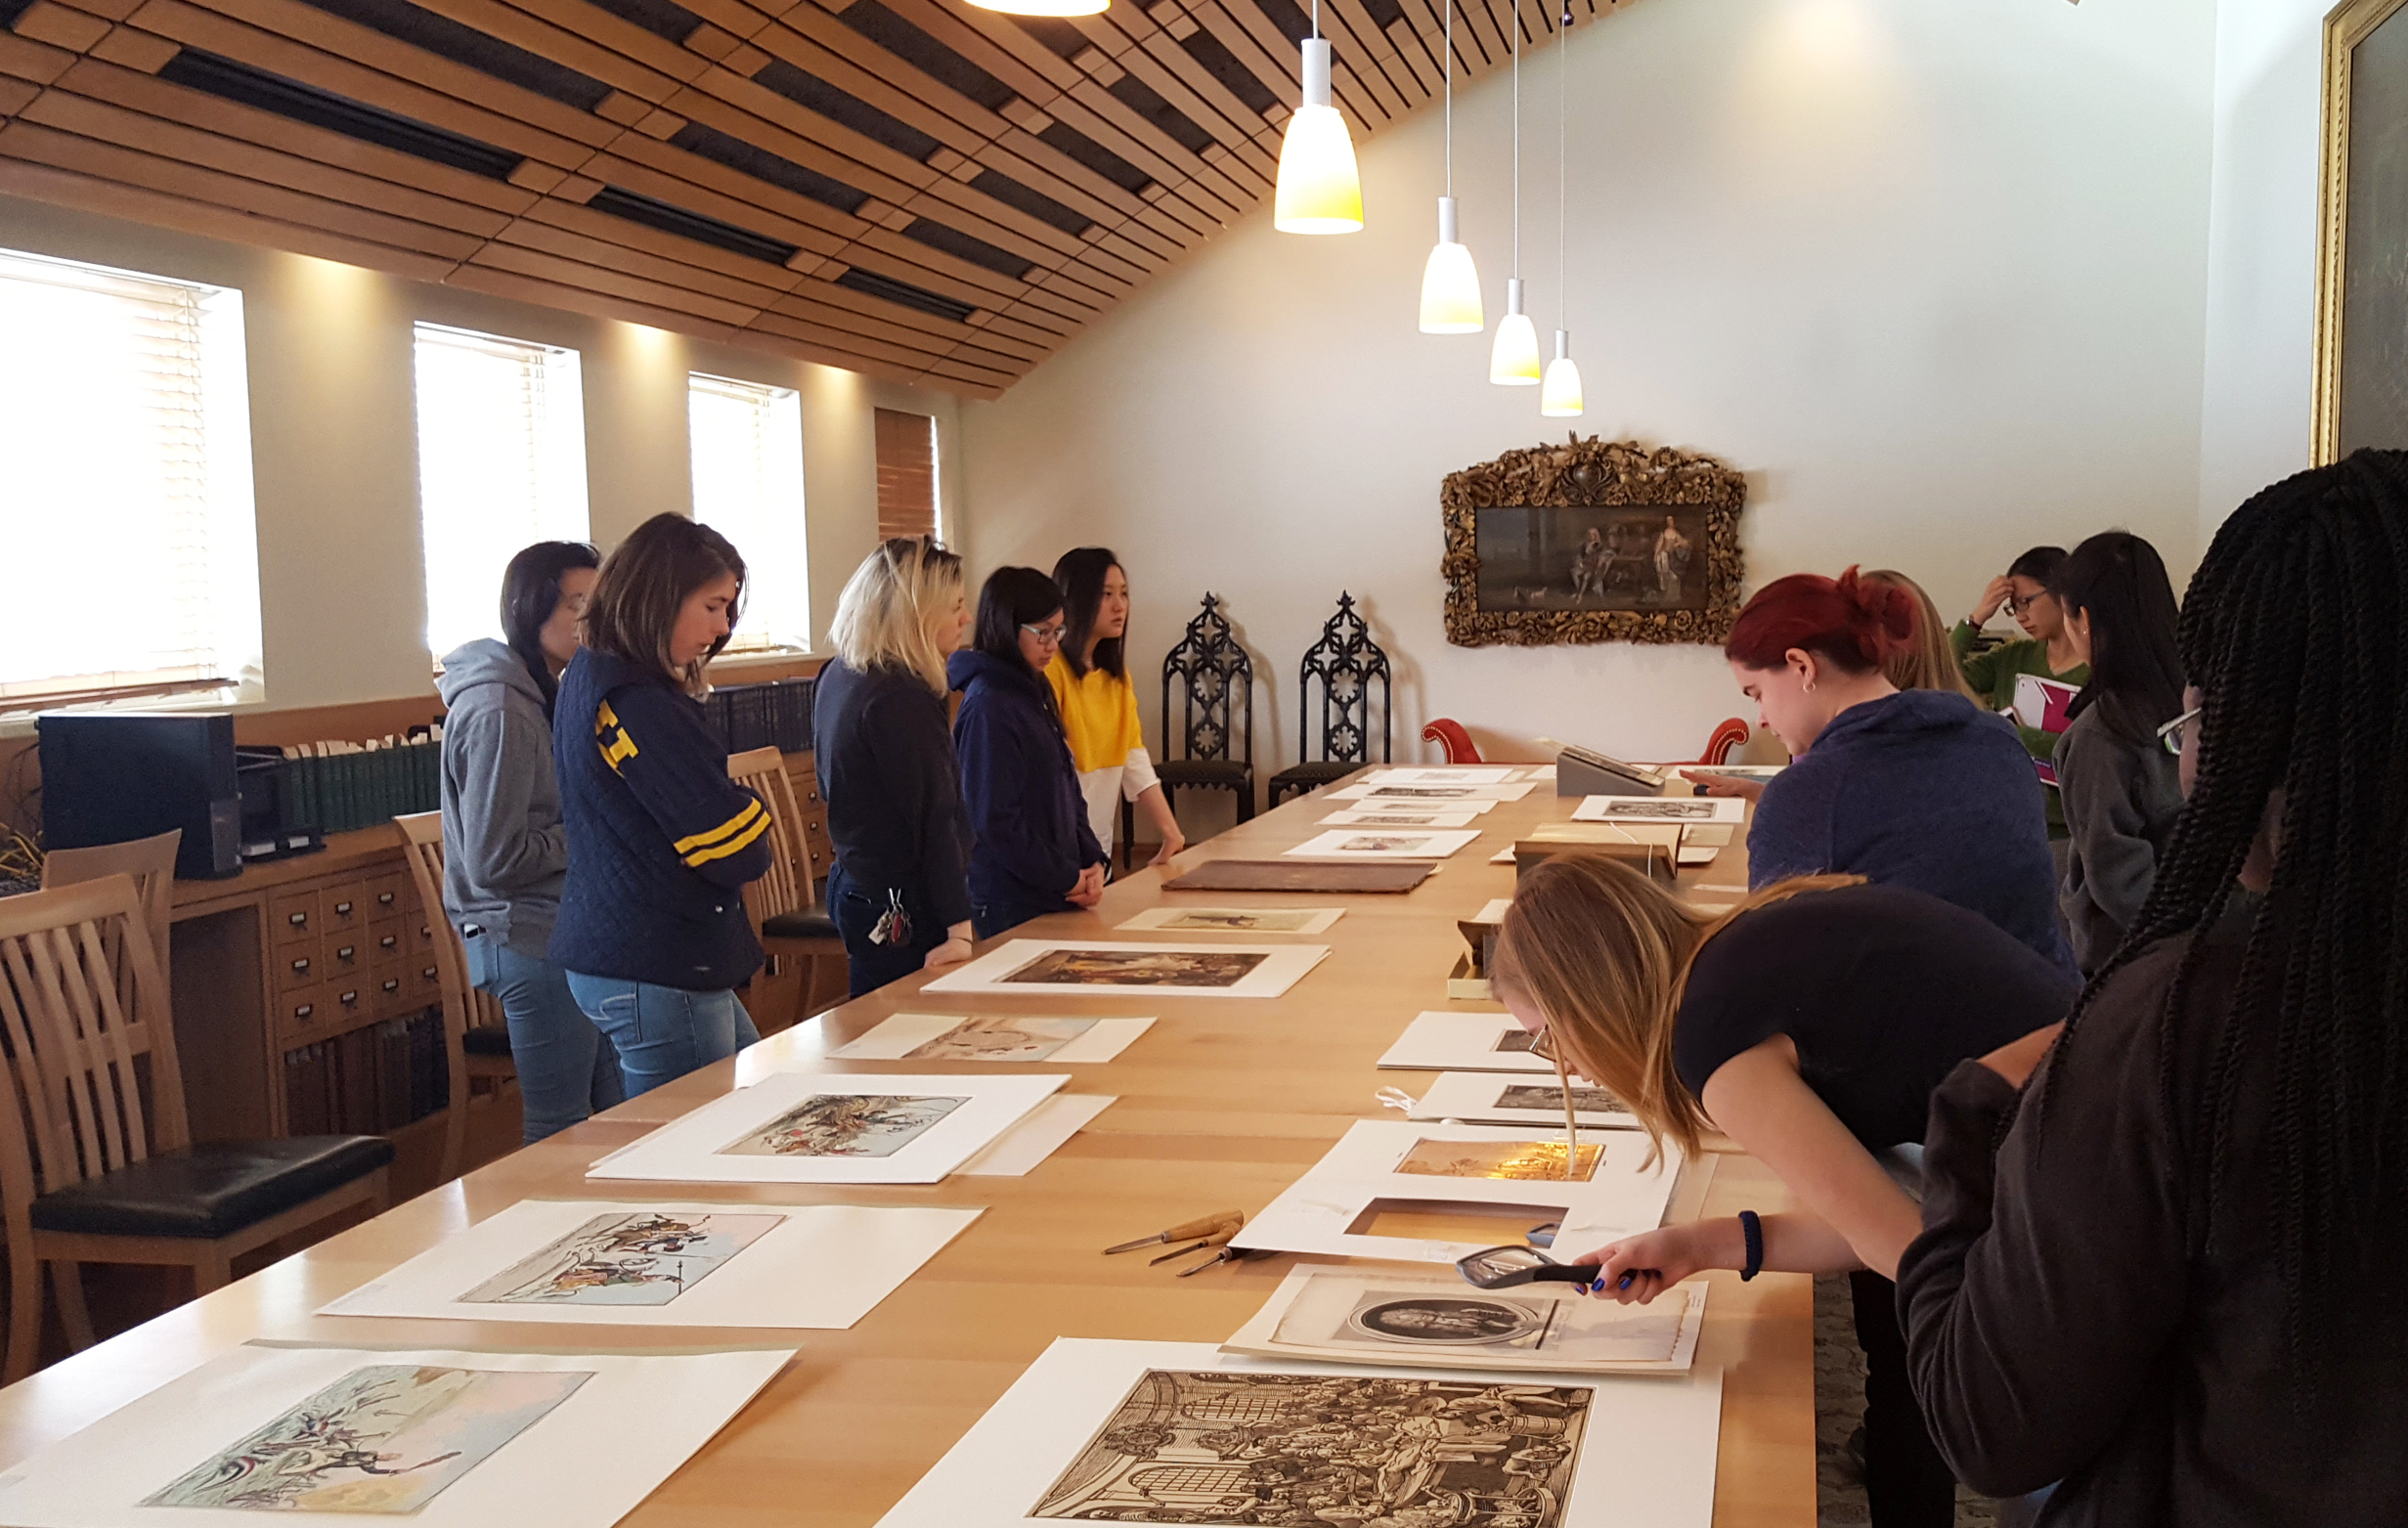 Students and researchers looking at books and prints on a long table at the Walpole Library